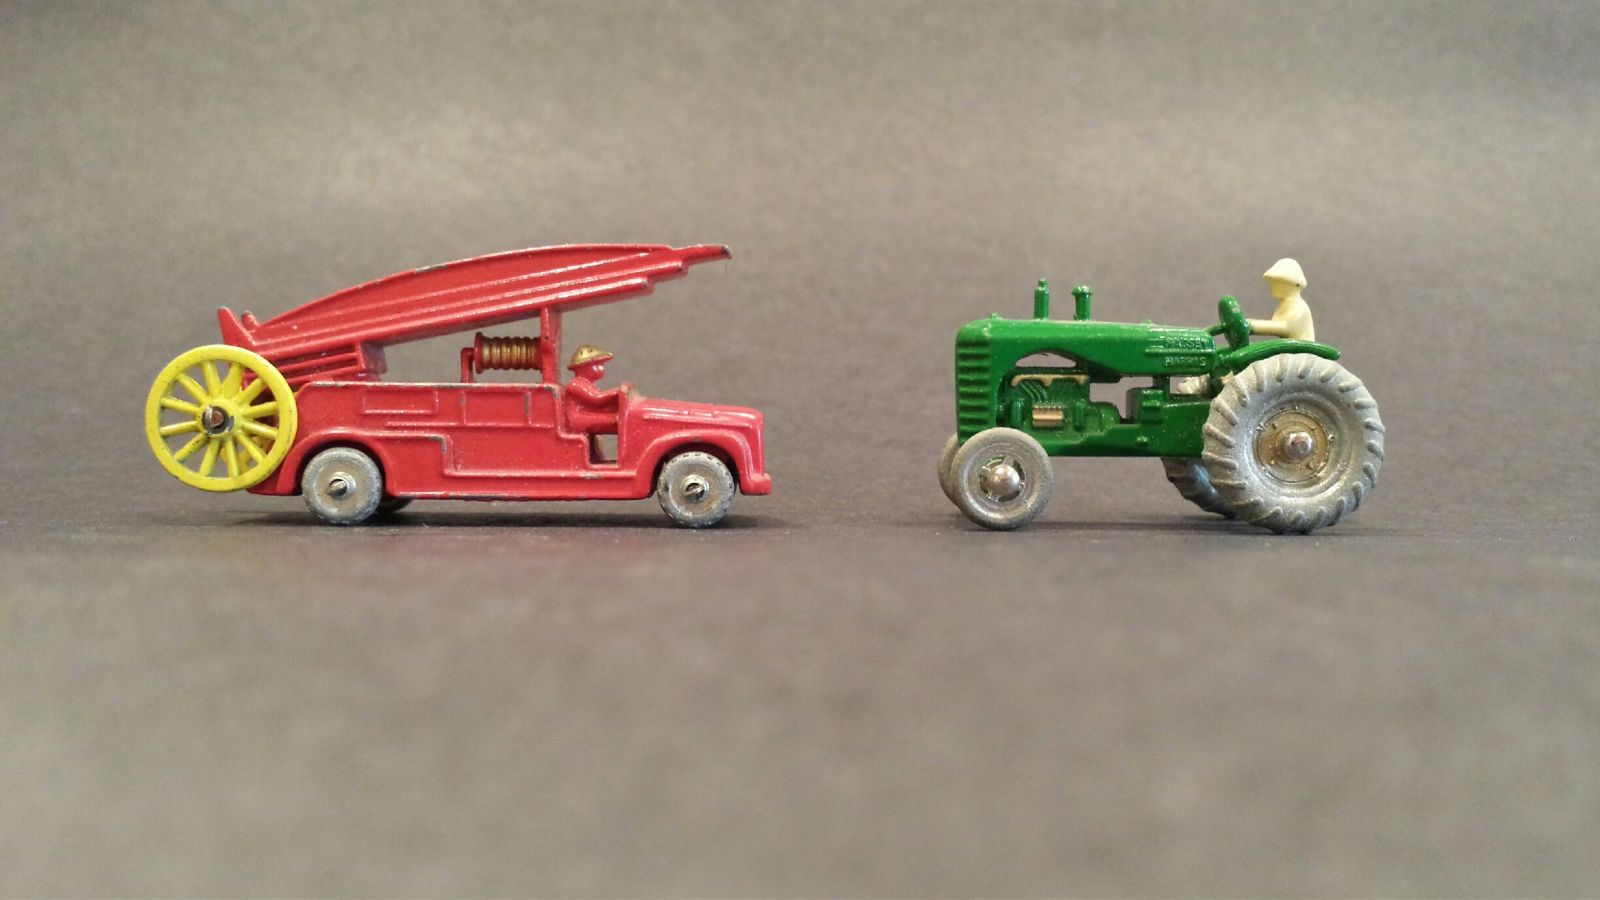 Illustration for article titled Throwback Thursday: Matchbox Recreations